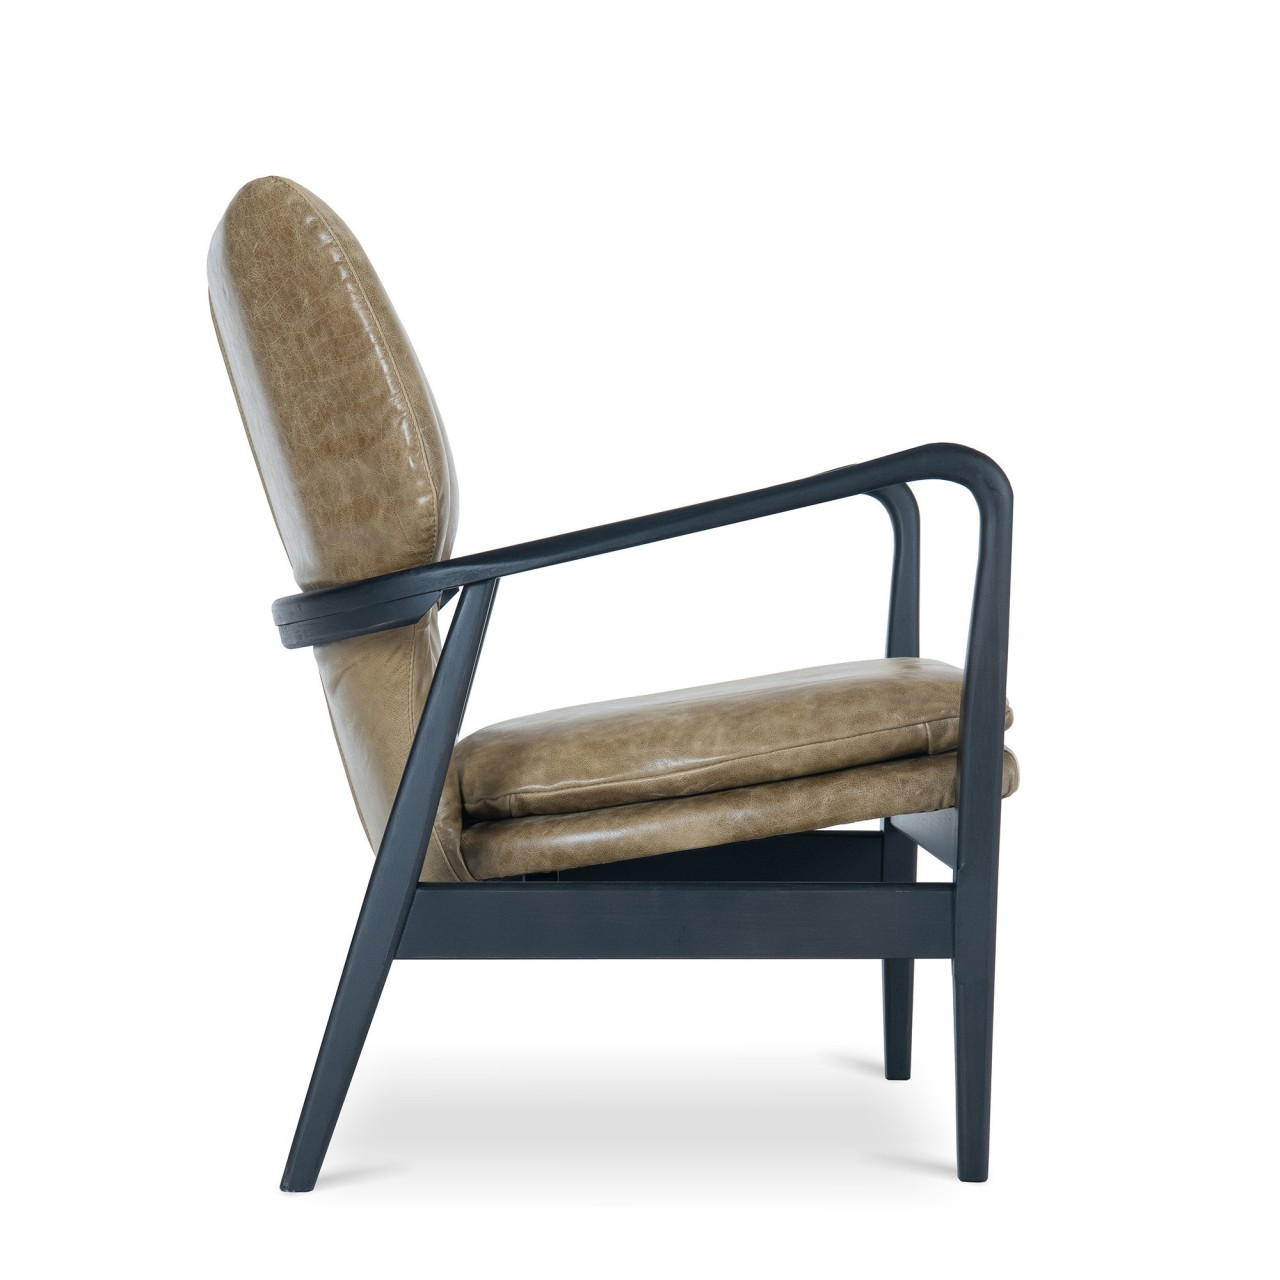 BRODY CHAIR - CAMBRIDGE Sage Leather